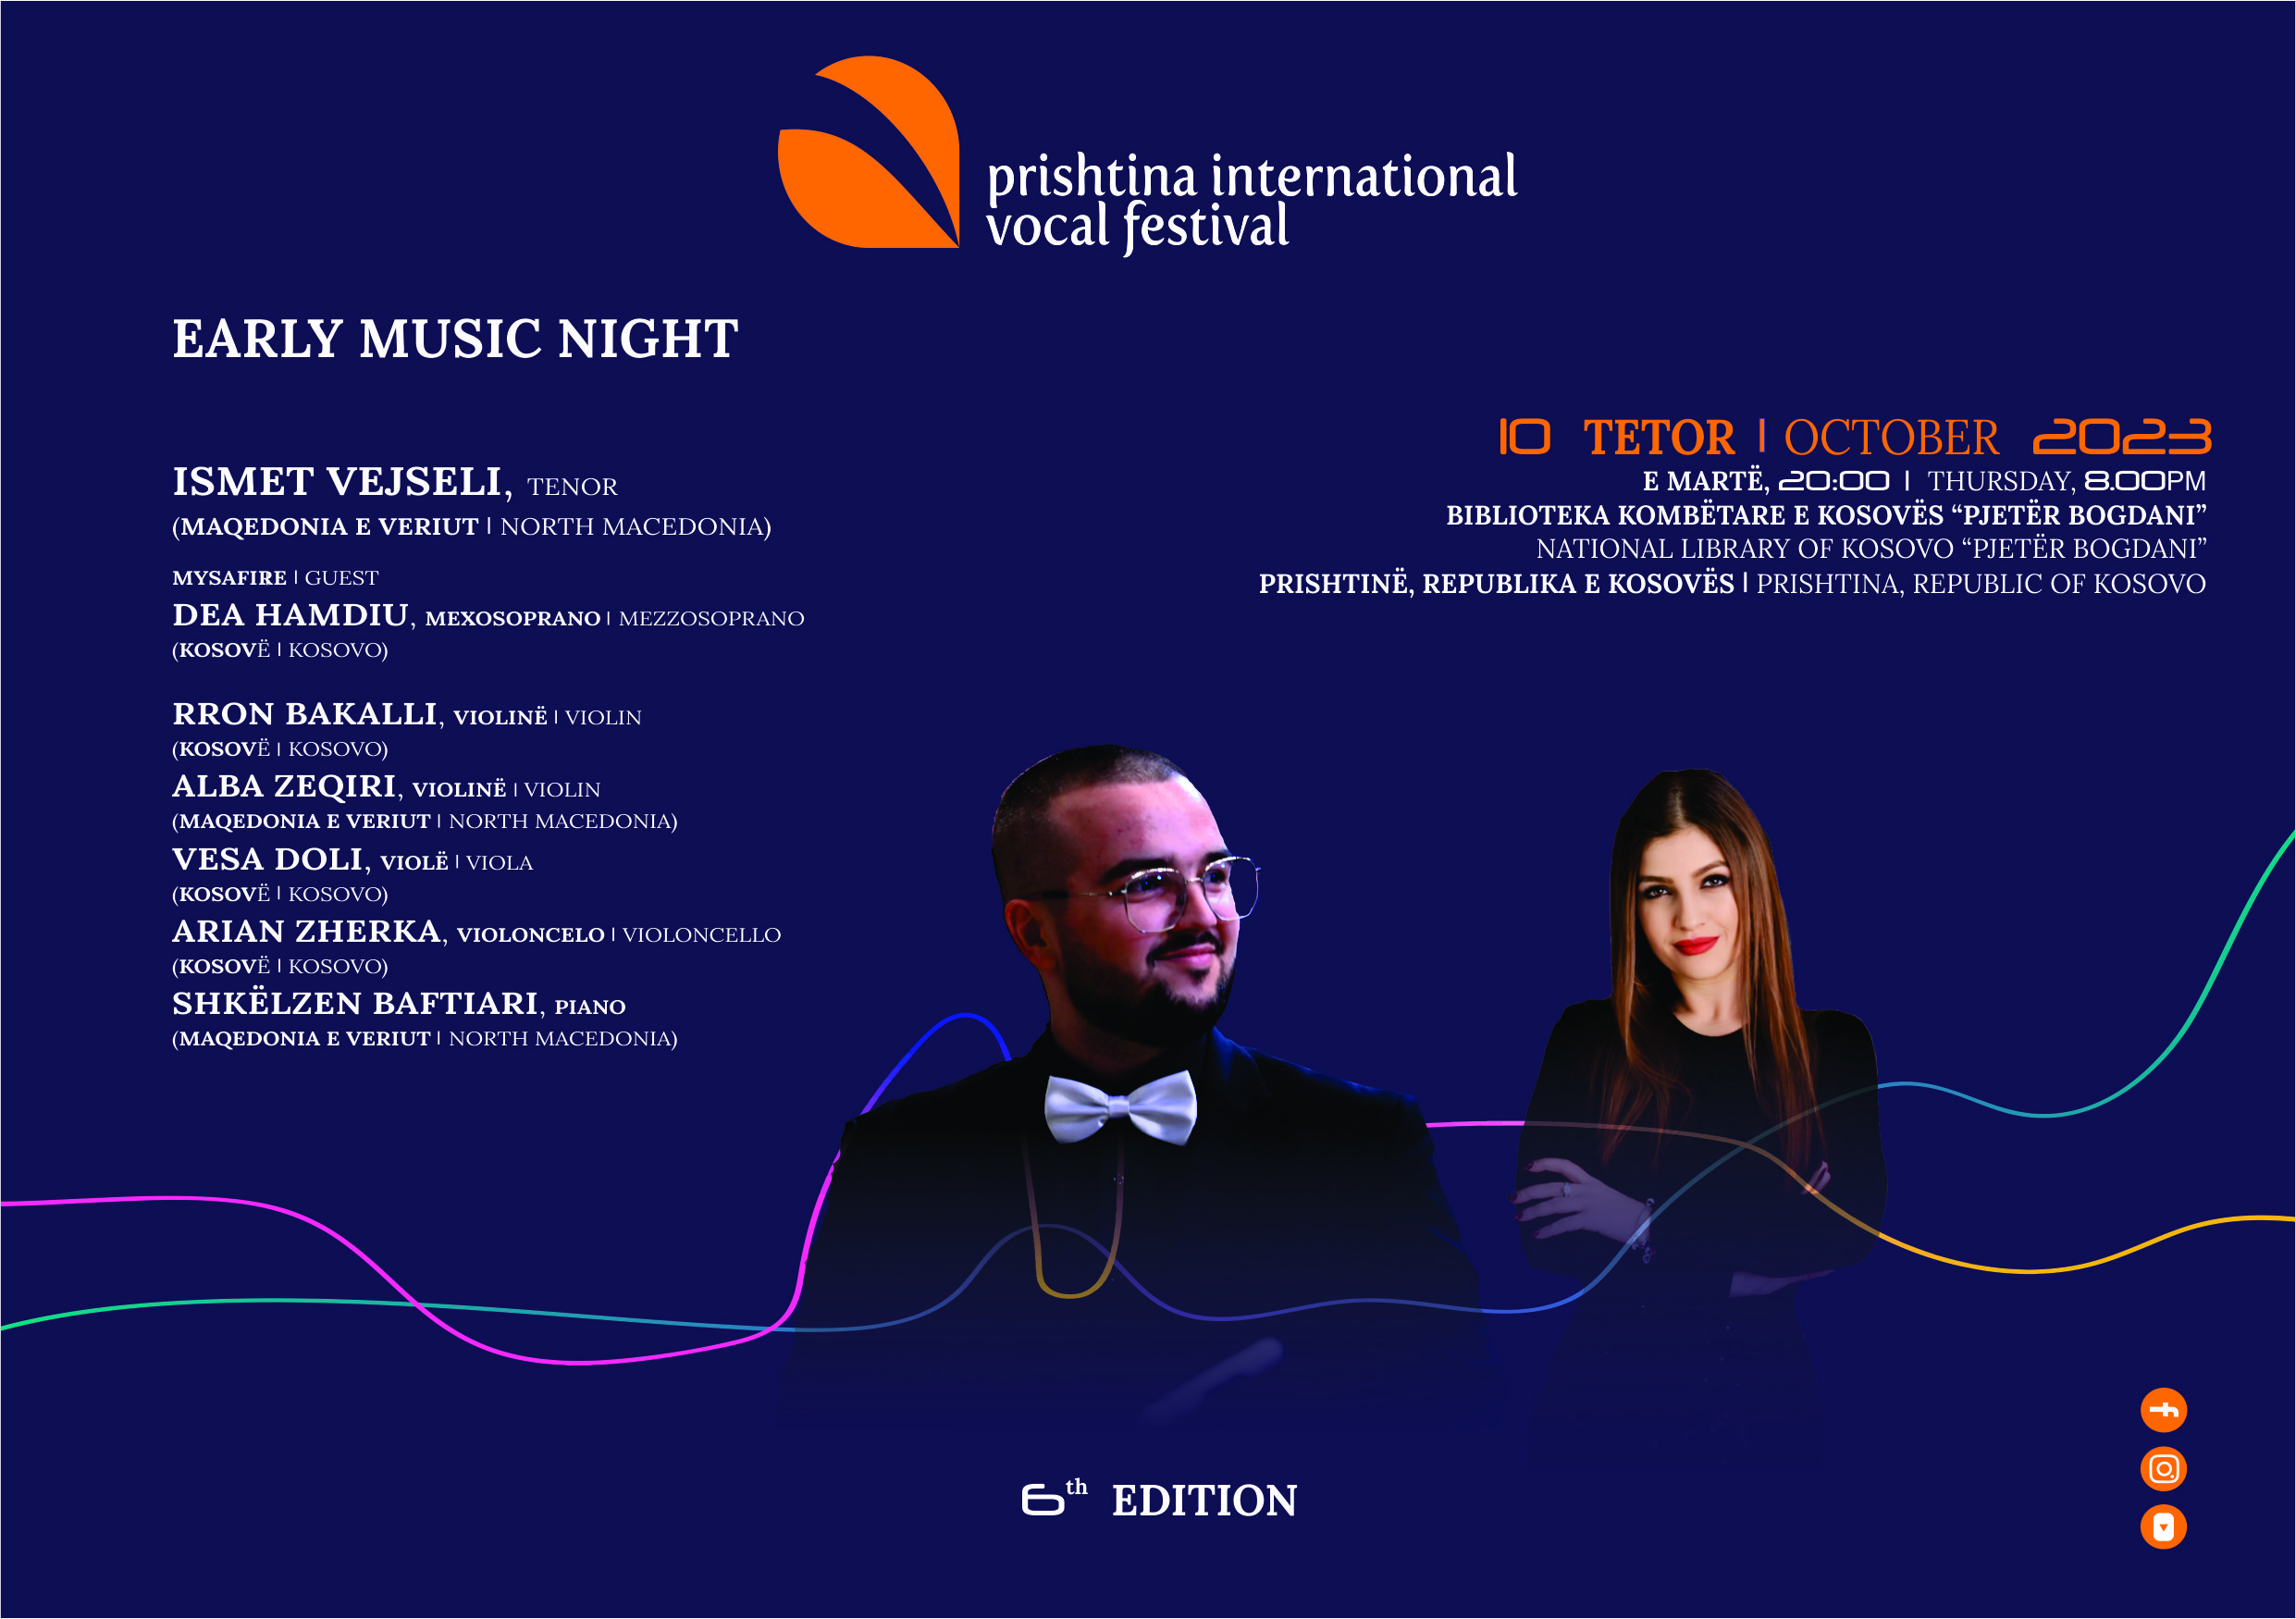 PrIVocalFest - 6th Edition |  EARLY MUSIC NIGHT